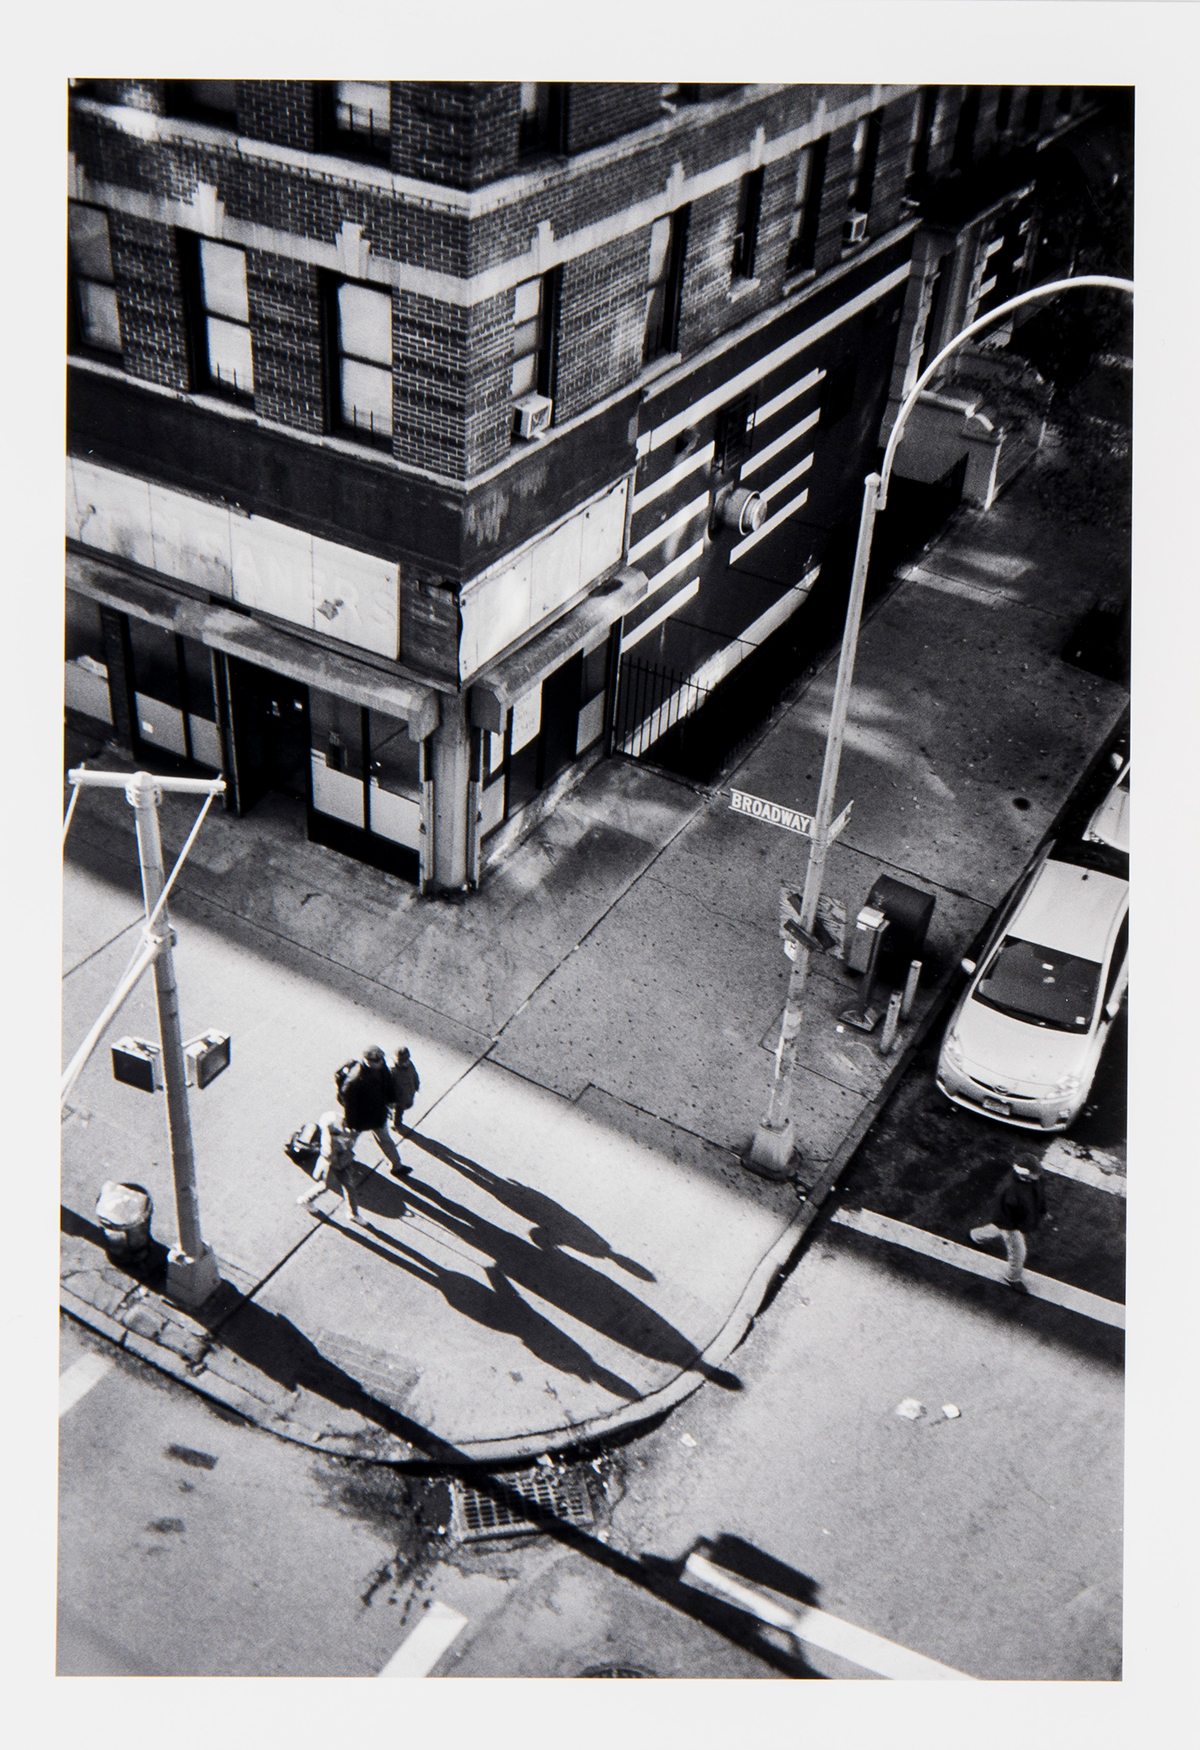 A photograph of passersby on the street from a high vantage